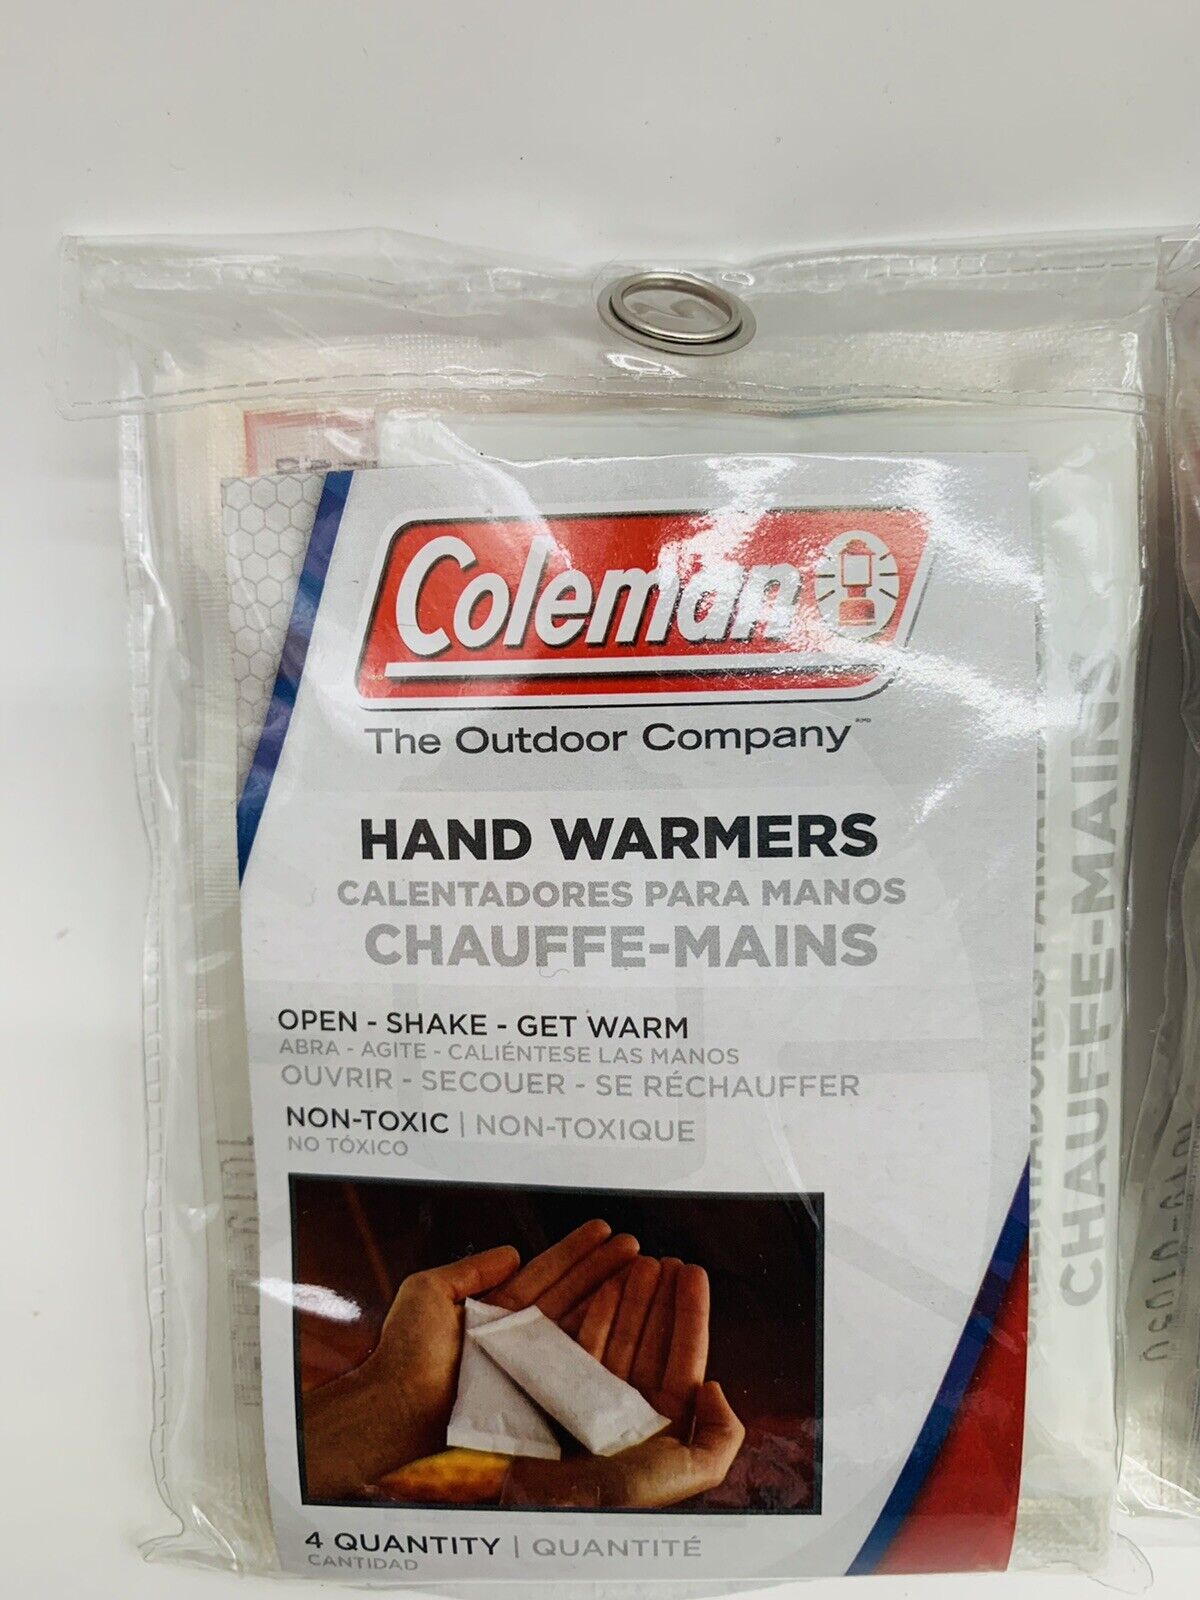 Lot of 3 Coleman Hand Warmers 4 Packs (8 Total) - Buy More And Save More New Coleman 20161116 - фотография #4